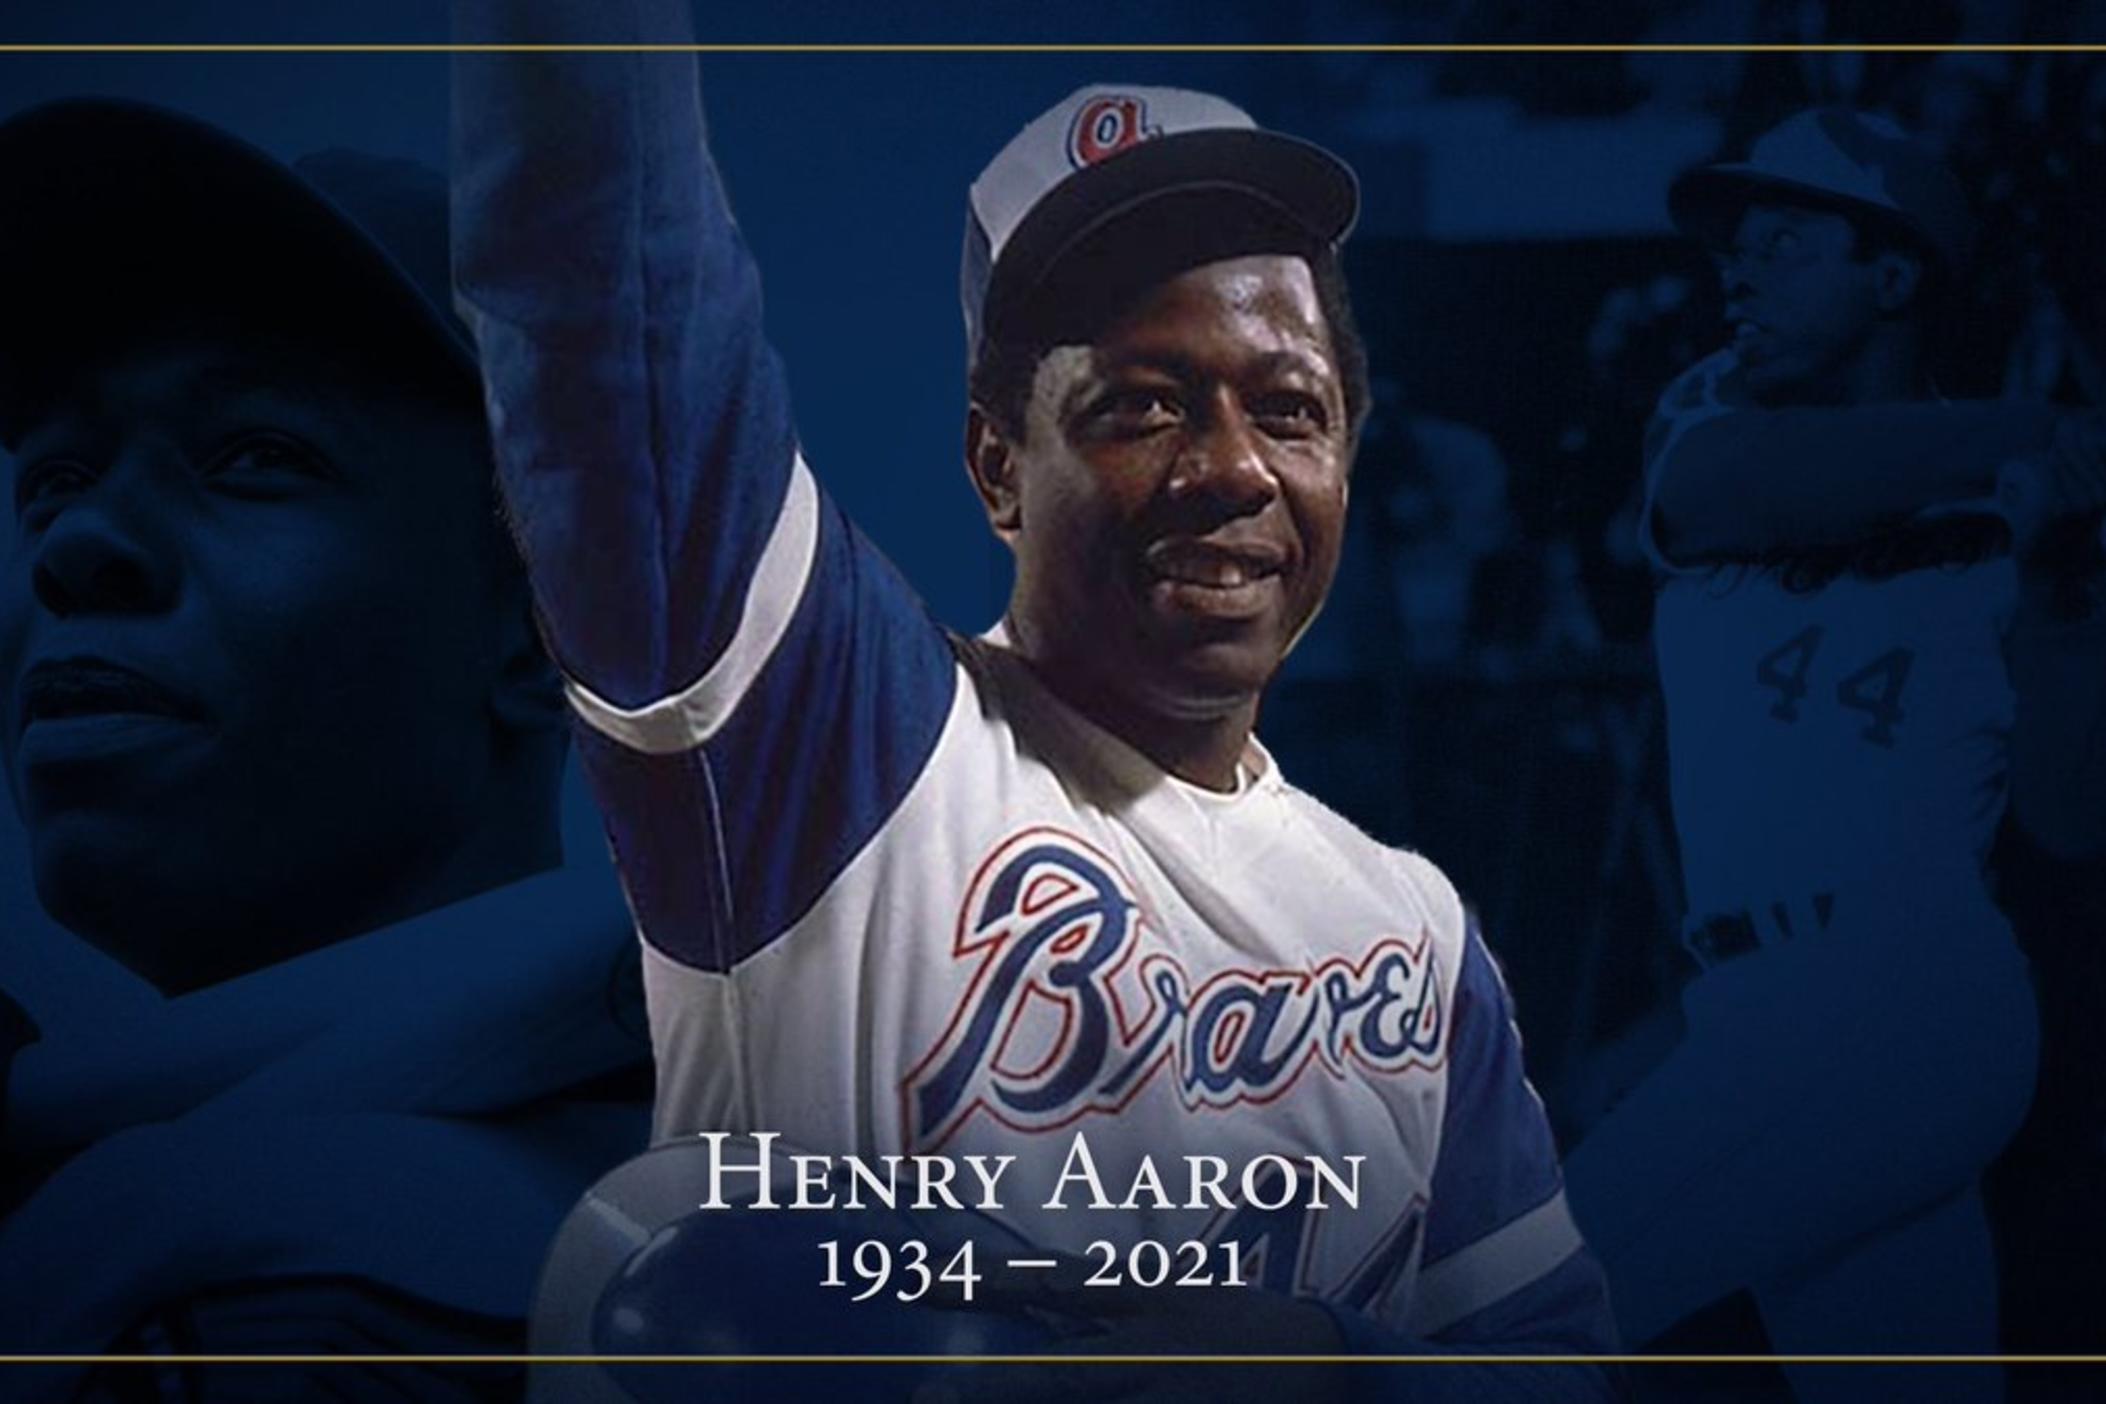 Hank Aaron's death prompts call to change name: Braves to Hammers, MLB